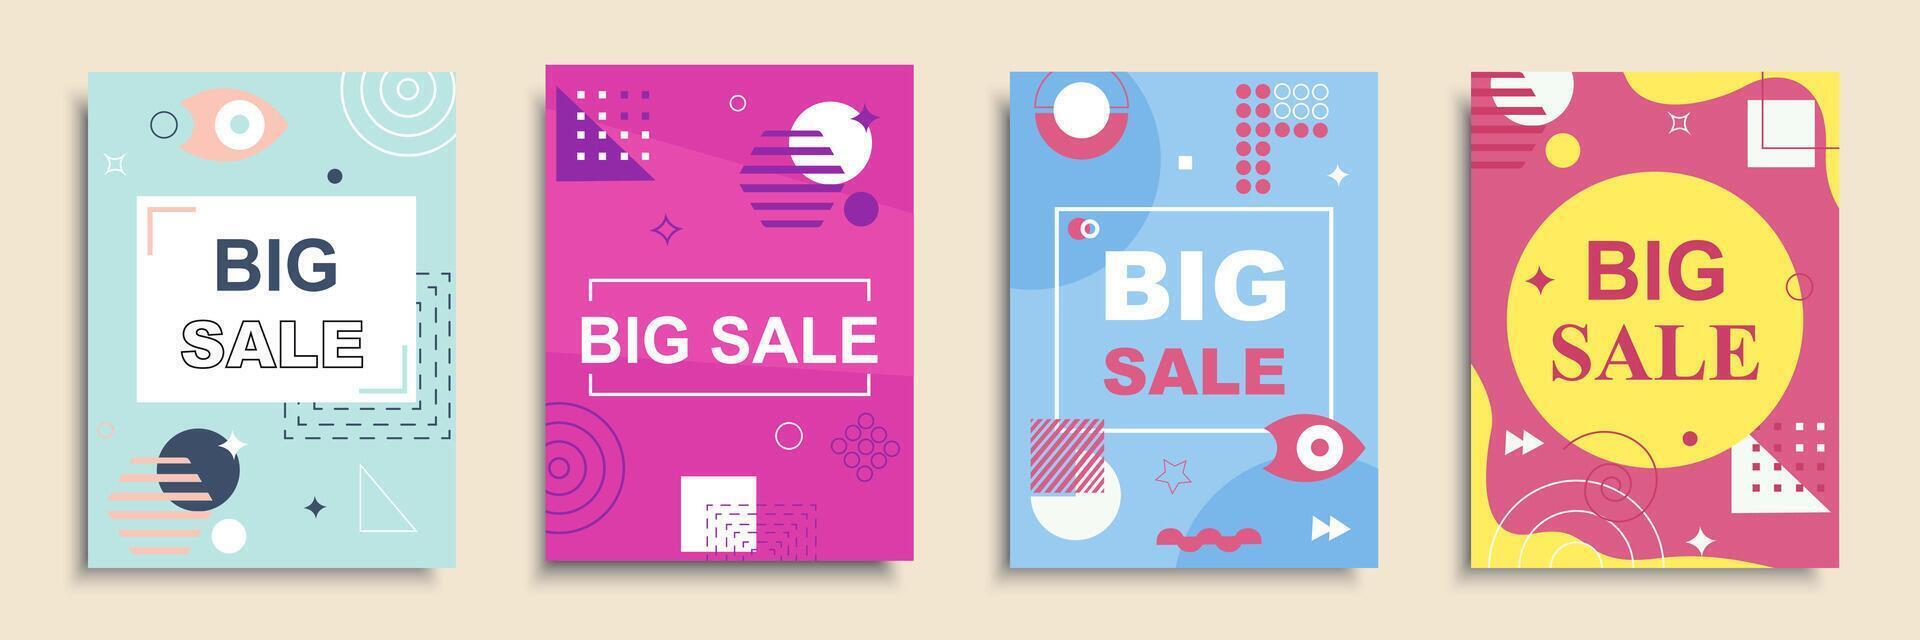 Big sale cover brochure set in flat design. Poster templates with simple geometric shapes for clearance announcement and advertising information for seasonal shopping events. Vector illustration